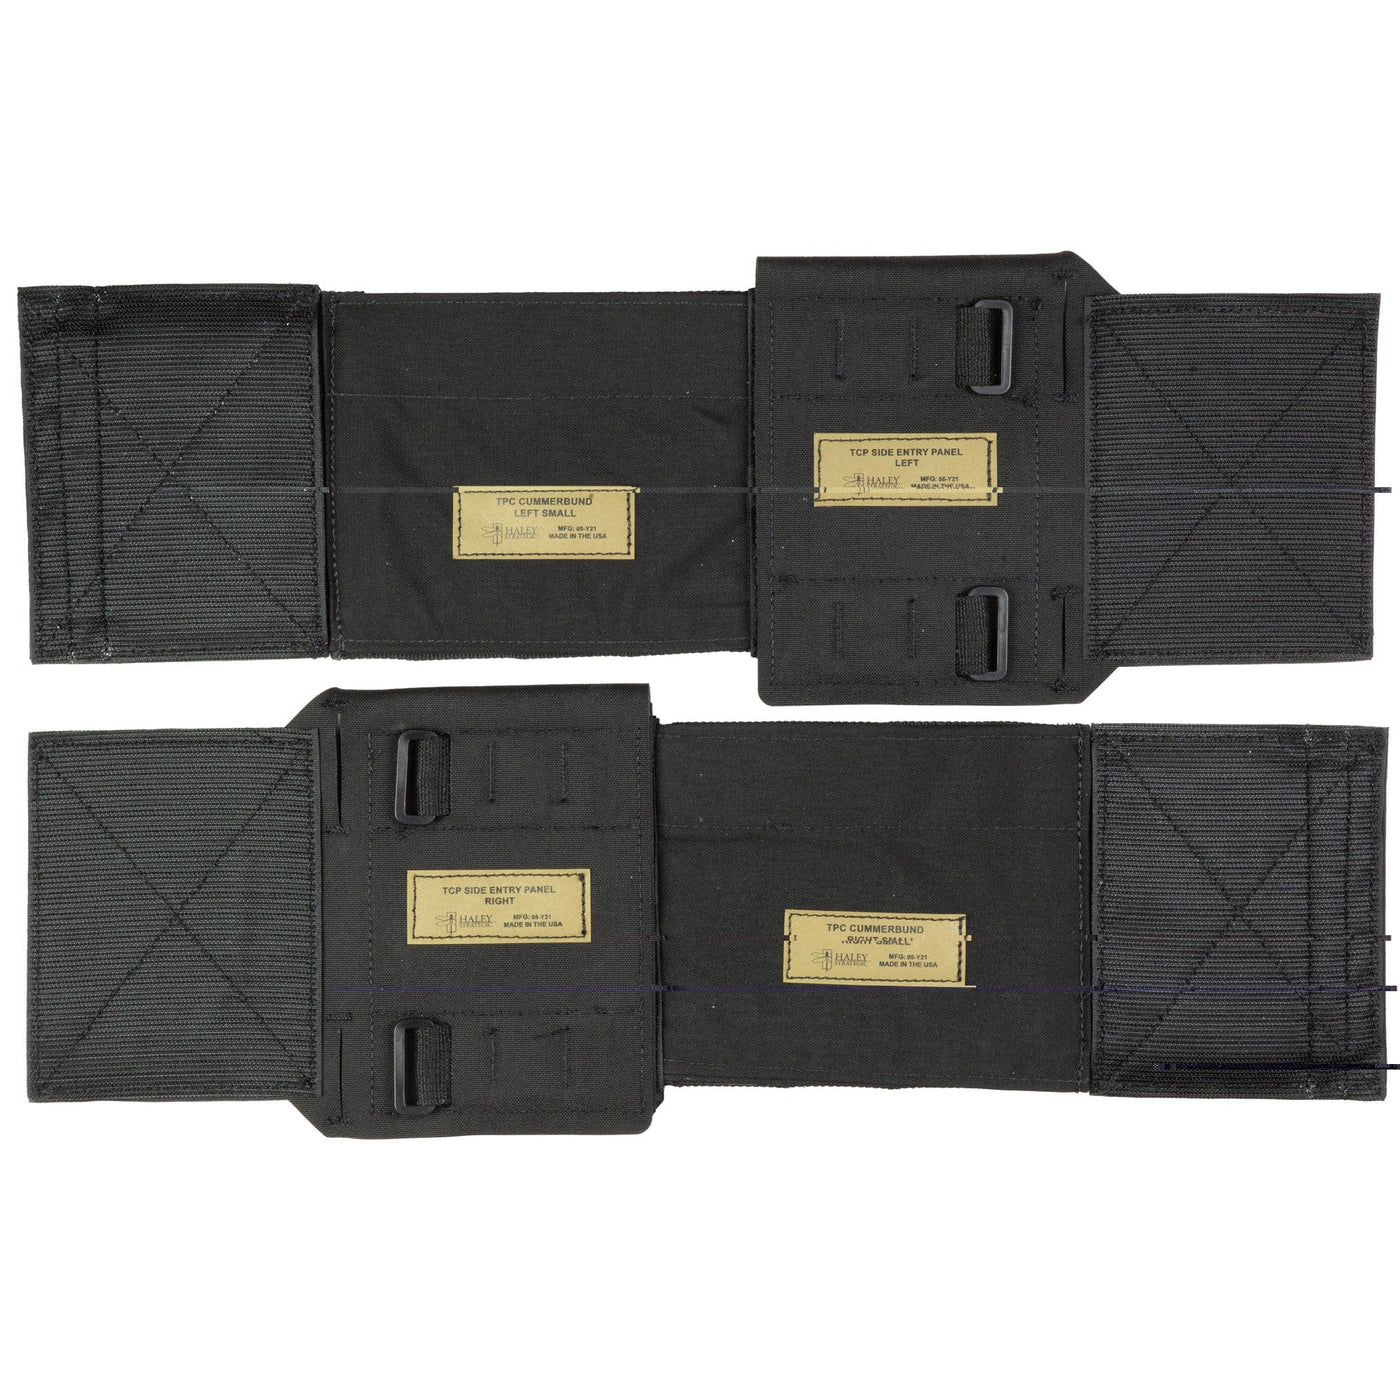 Haley Strategic Partners Hsp Thorax Pc Sep Cmbrbnd Holsters